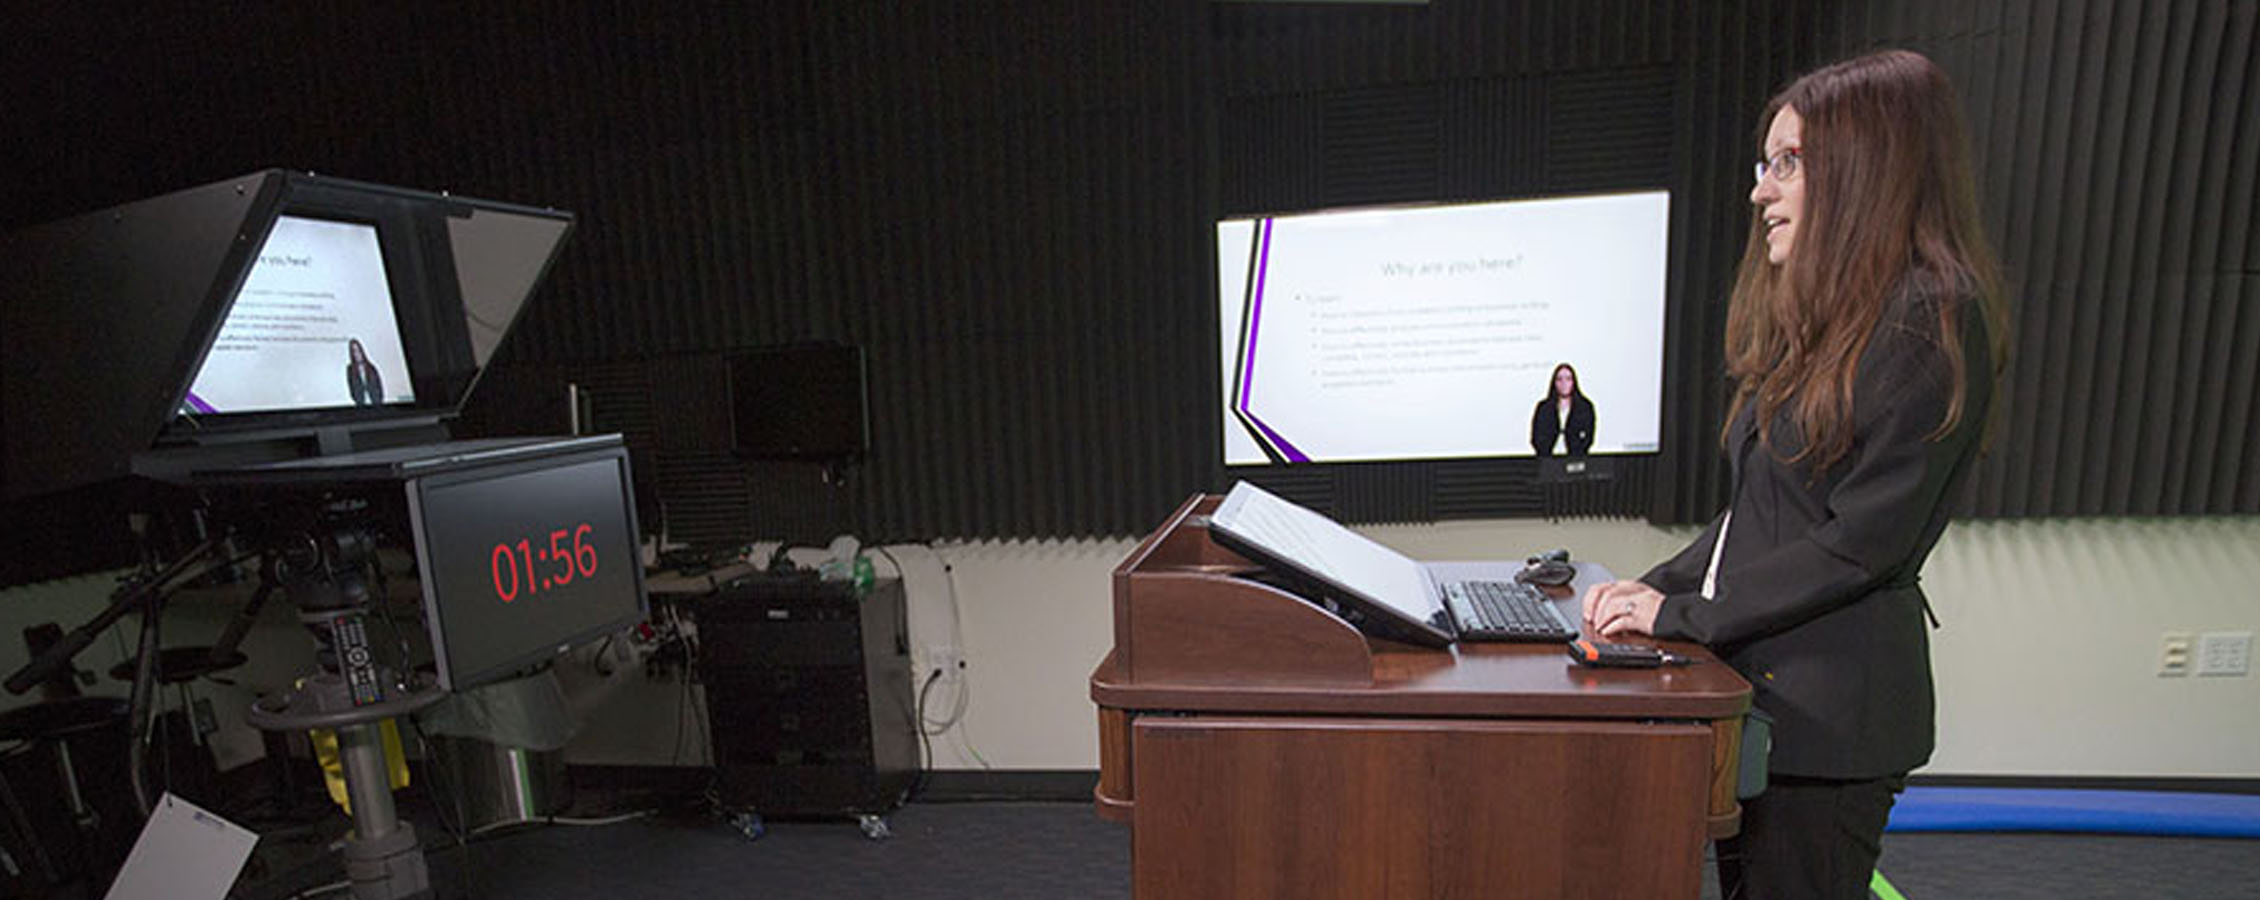 A faculty member speaks at a podium while being recorded.